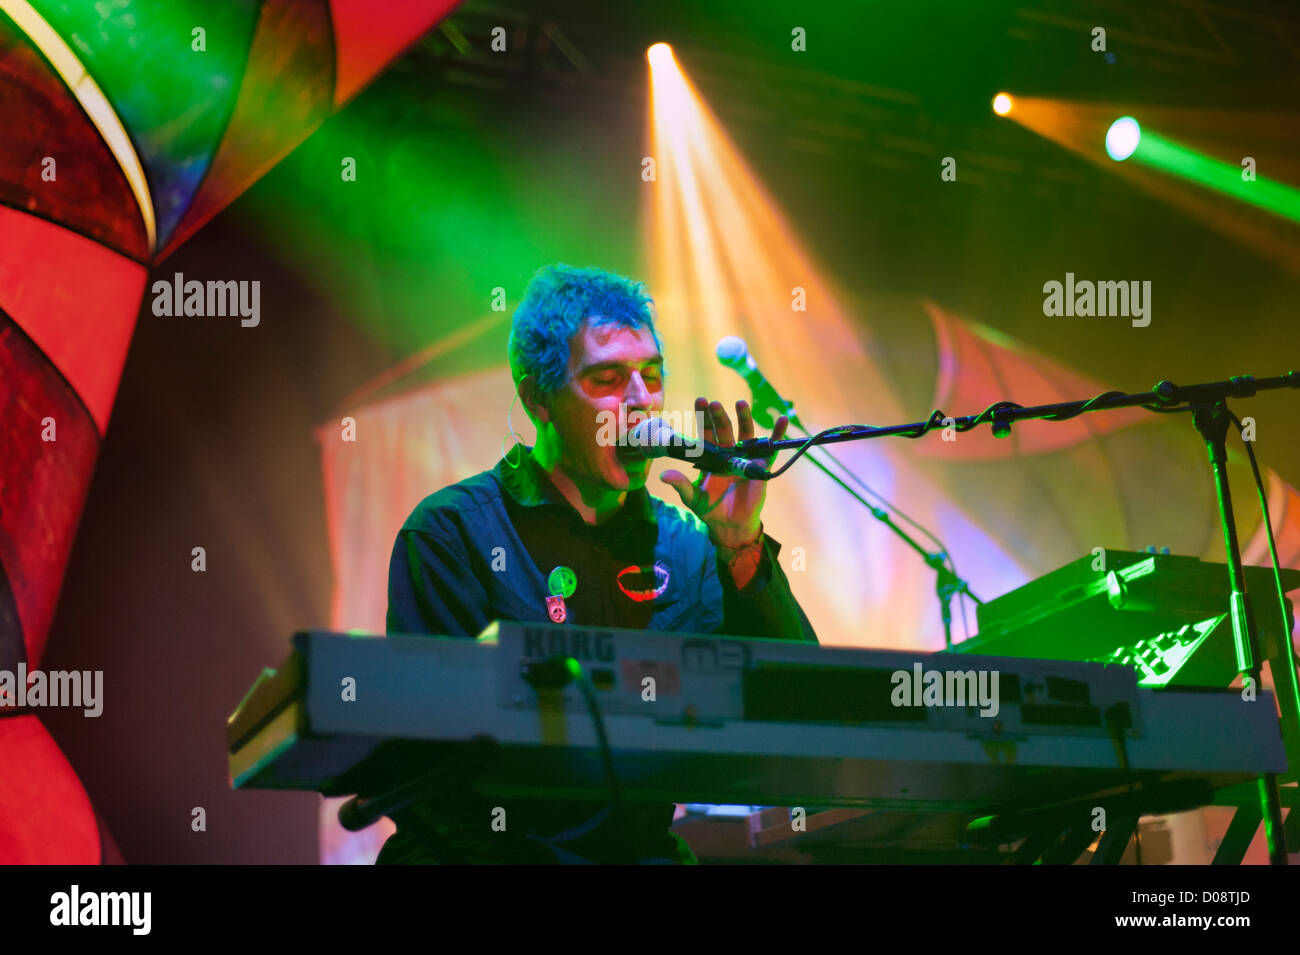 Alternative US rock band, Animal Collective in concert at Manchester Warehouse Project, UK, 8 November 2012. Avey Tare singing. Stock Photo